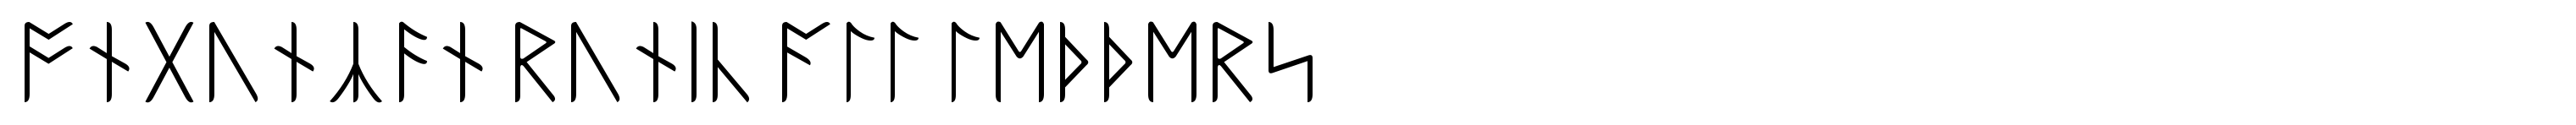 Ongunkan Runic All Letters